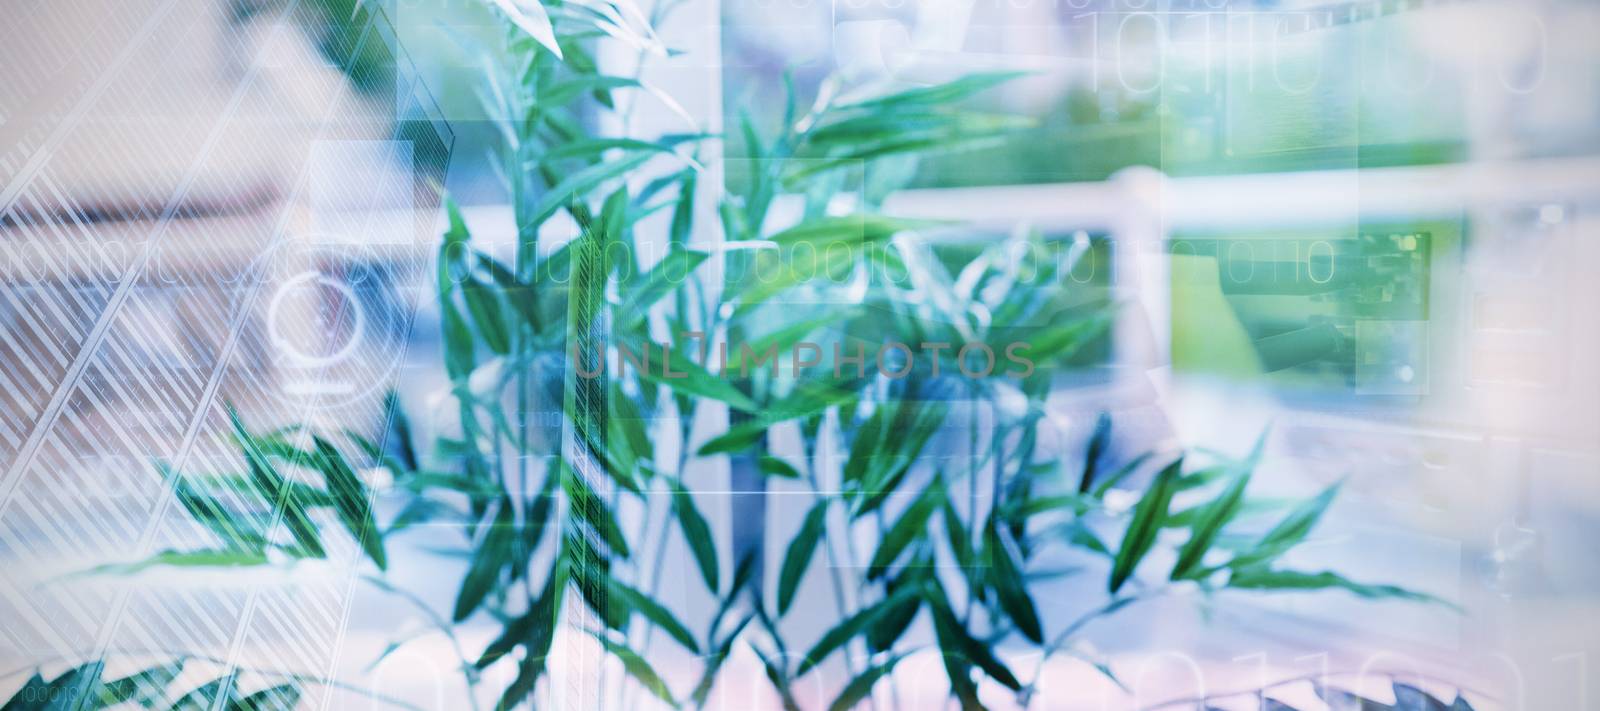 Composite image of blue technology design with binary code against close-up of plant